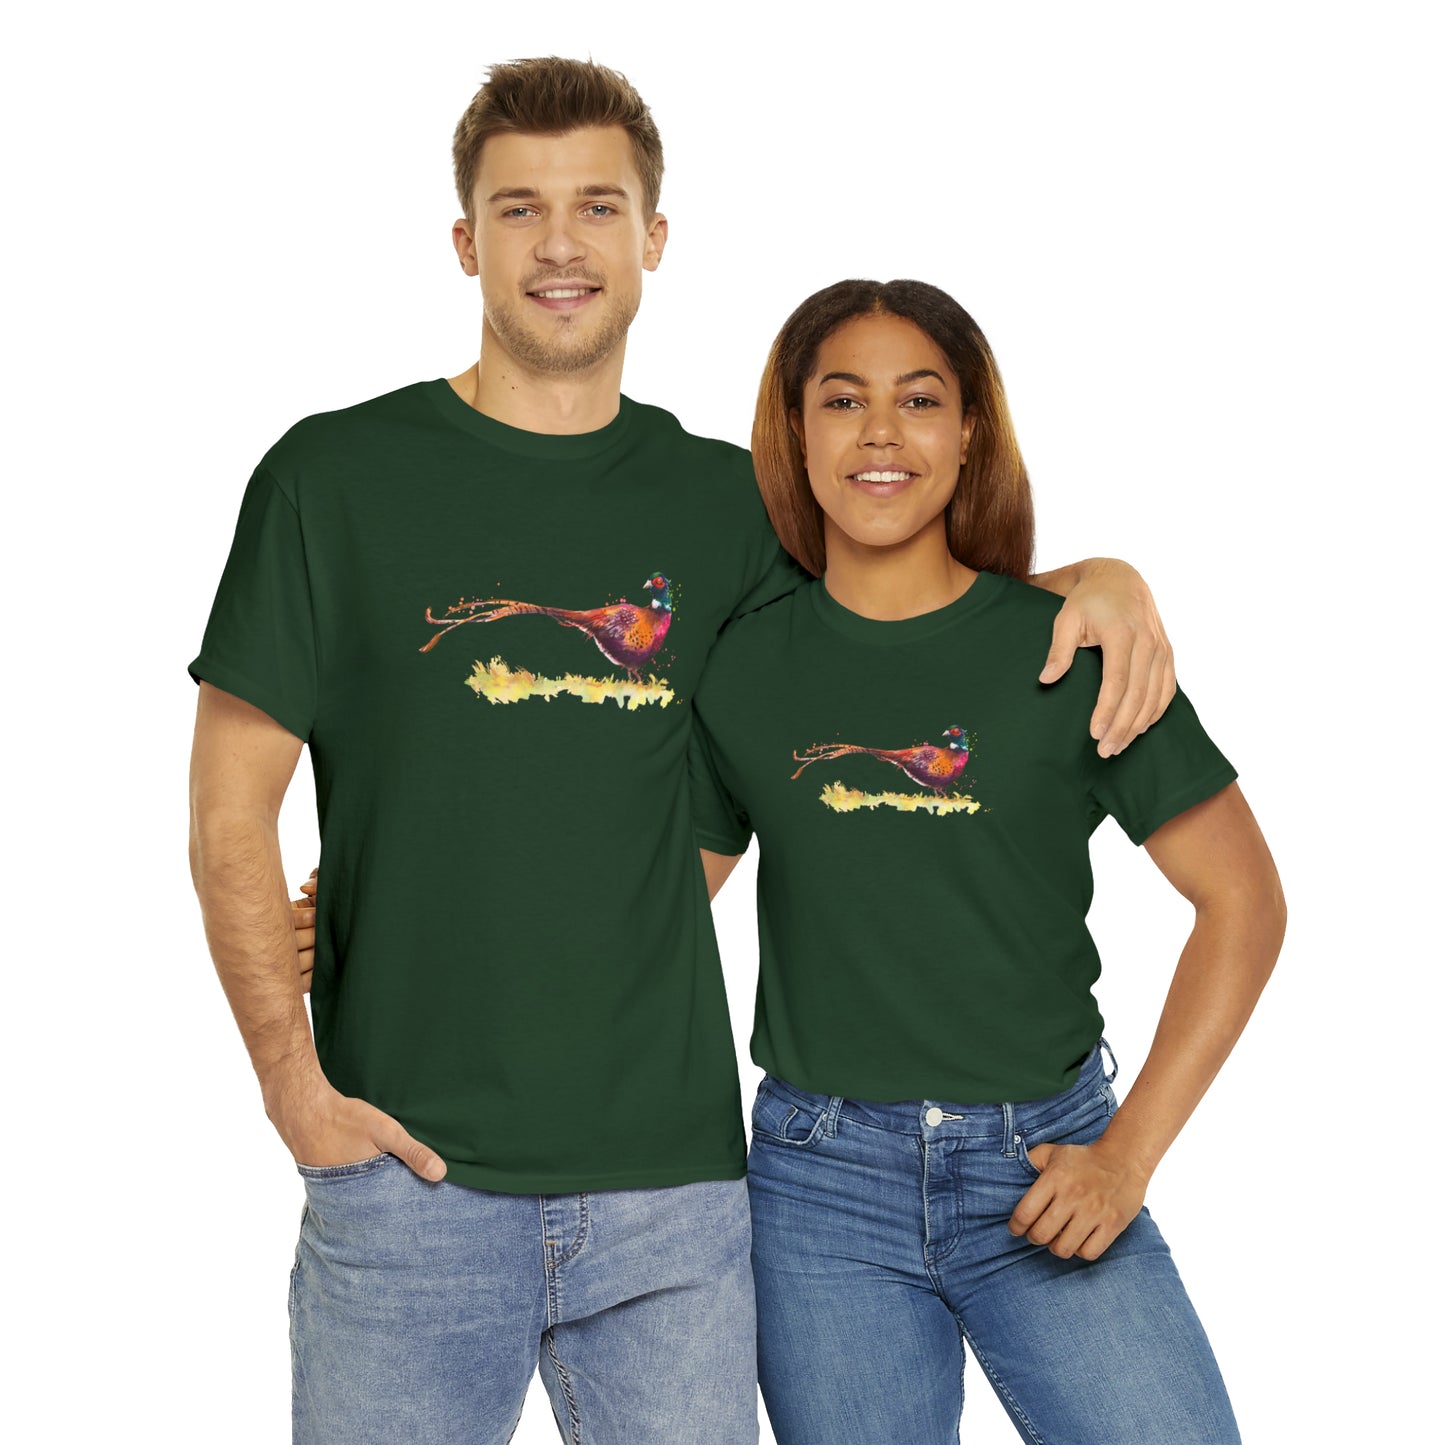 A man and a woman wearing the Forest Green shirt